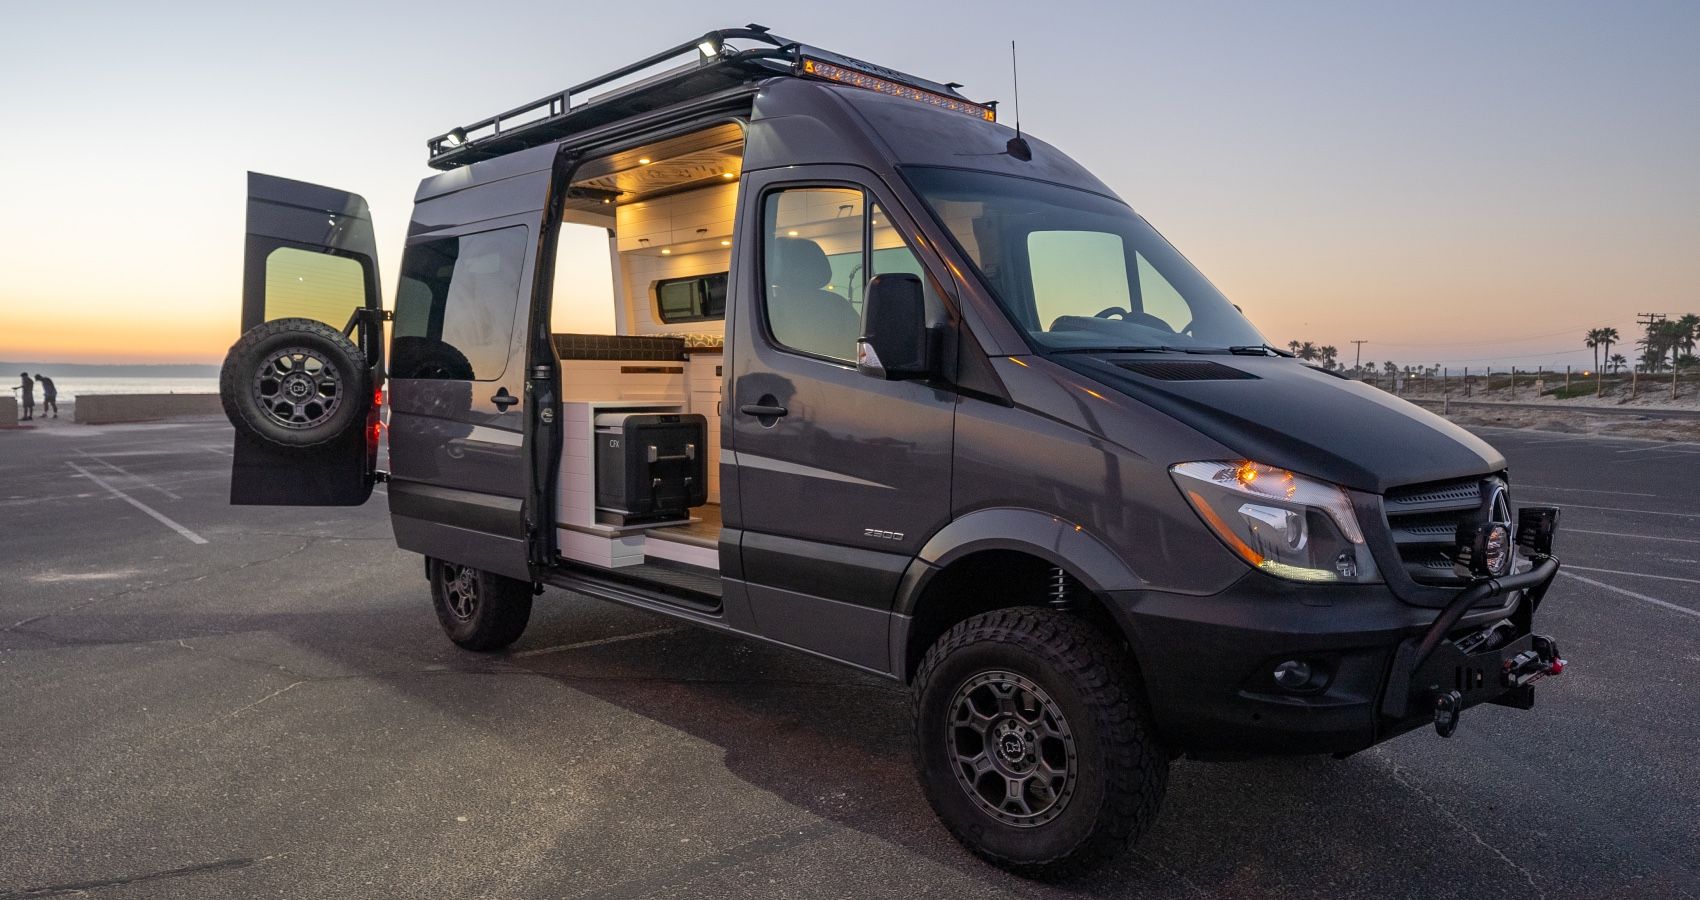 Forged 4x4’s "Artemis" Mercedes Sprinter Is A Fully-equipped Badass Camping Van